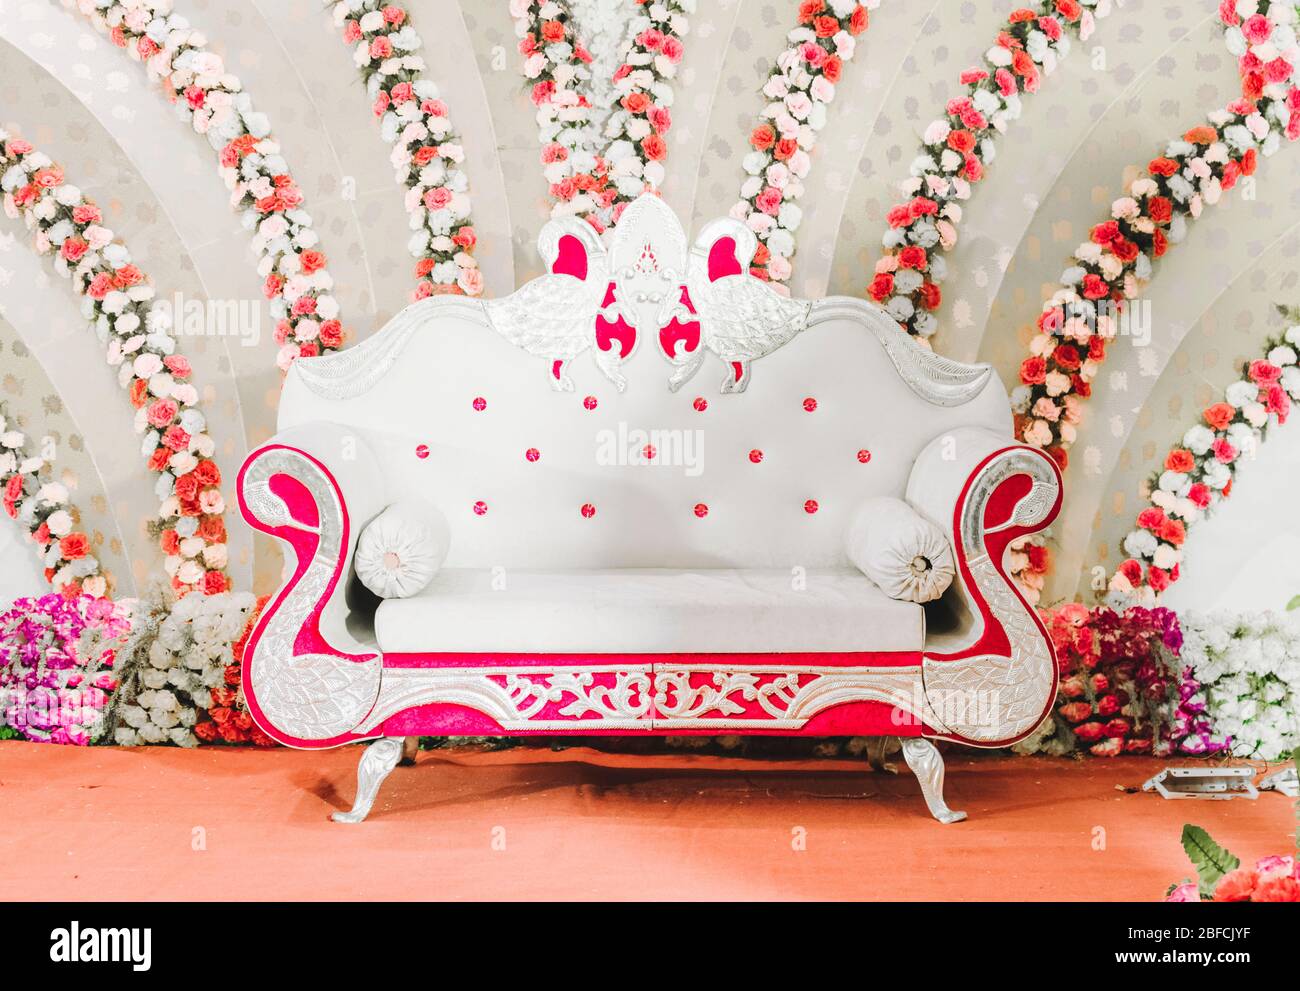 Indian Wedding Sofa High Resolution Stock Photography And Images Alamy